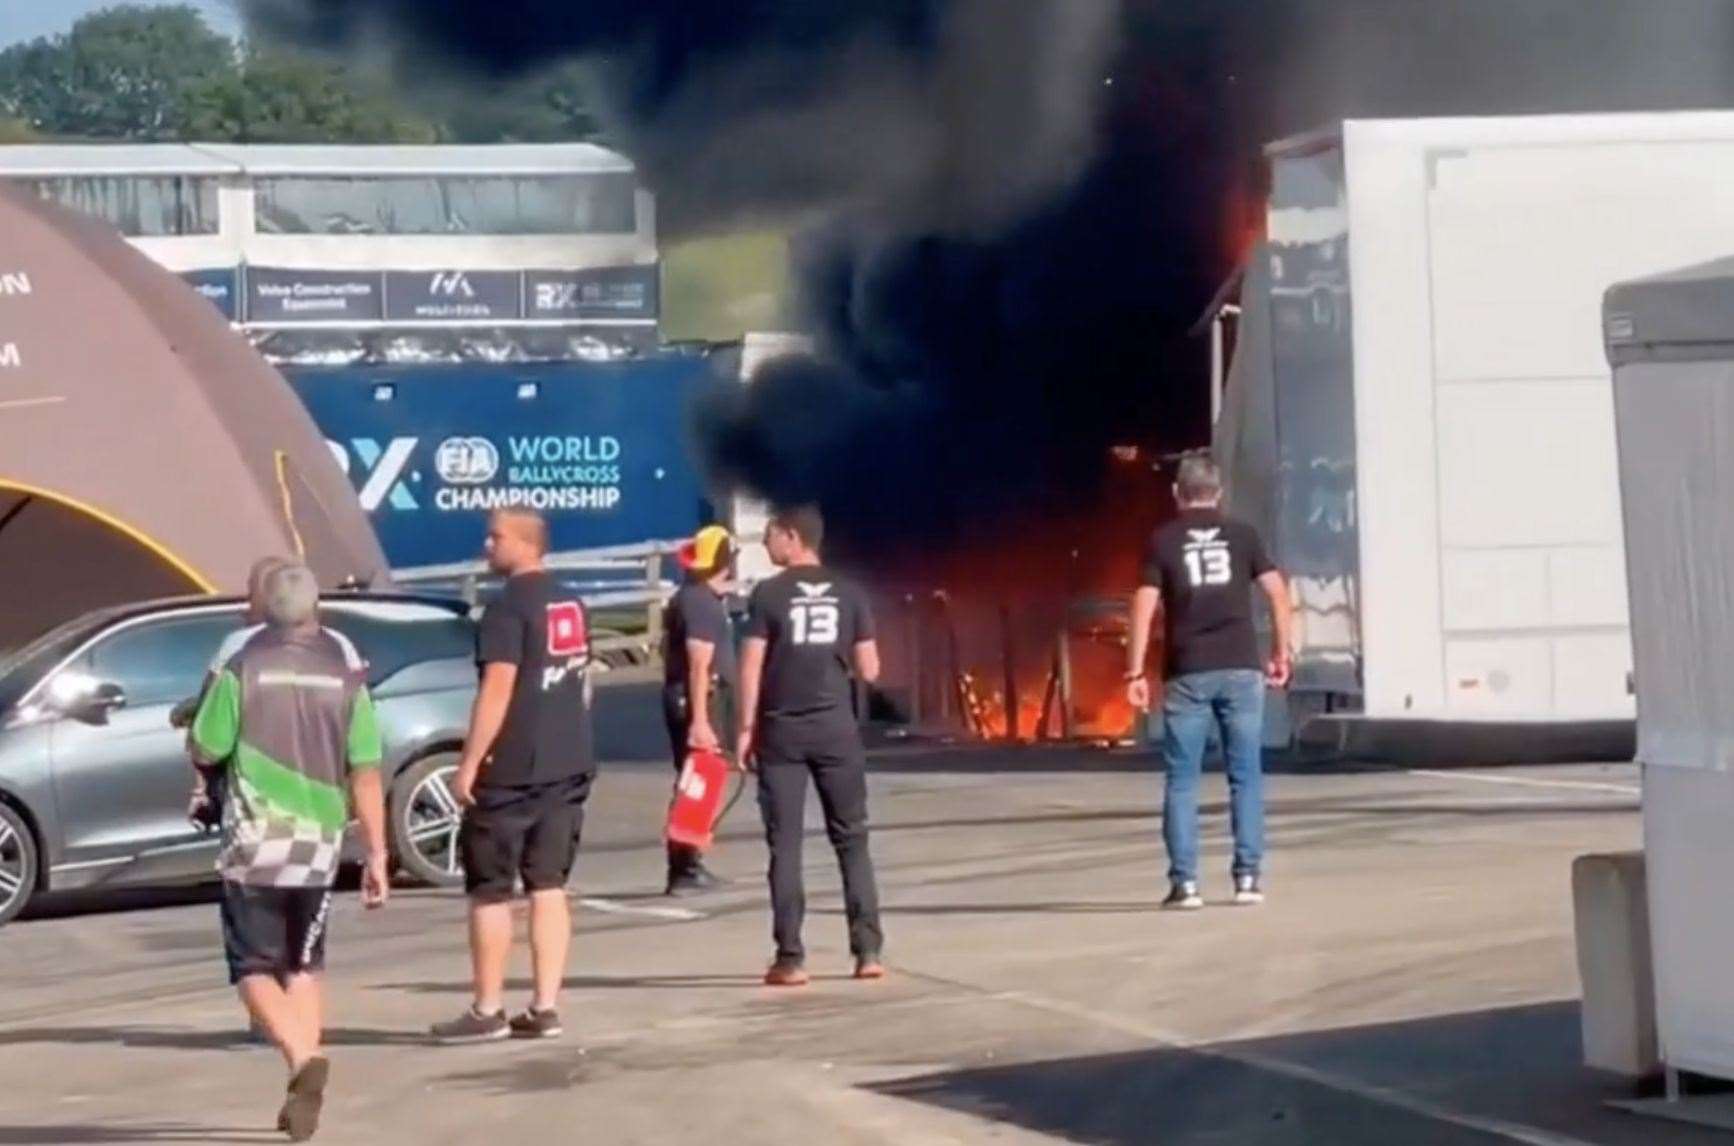 Teams are working to find out the root cause of the fire at Lydden Hill. Credit: Peter Rosenberg